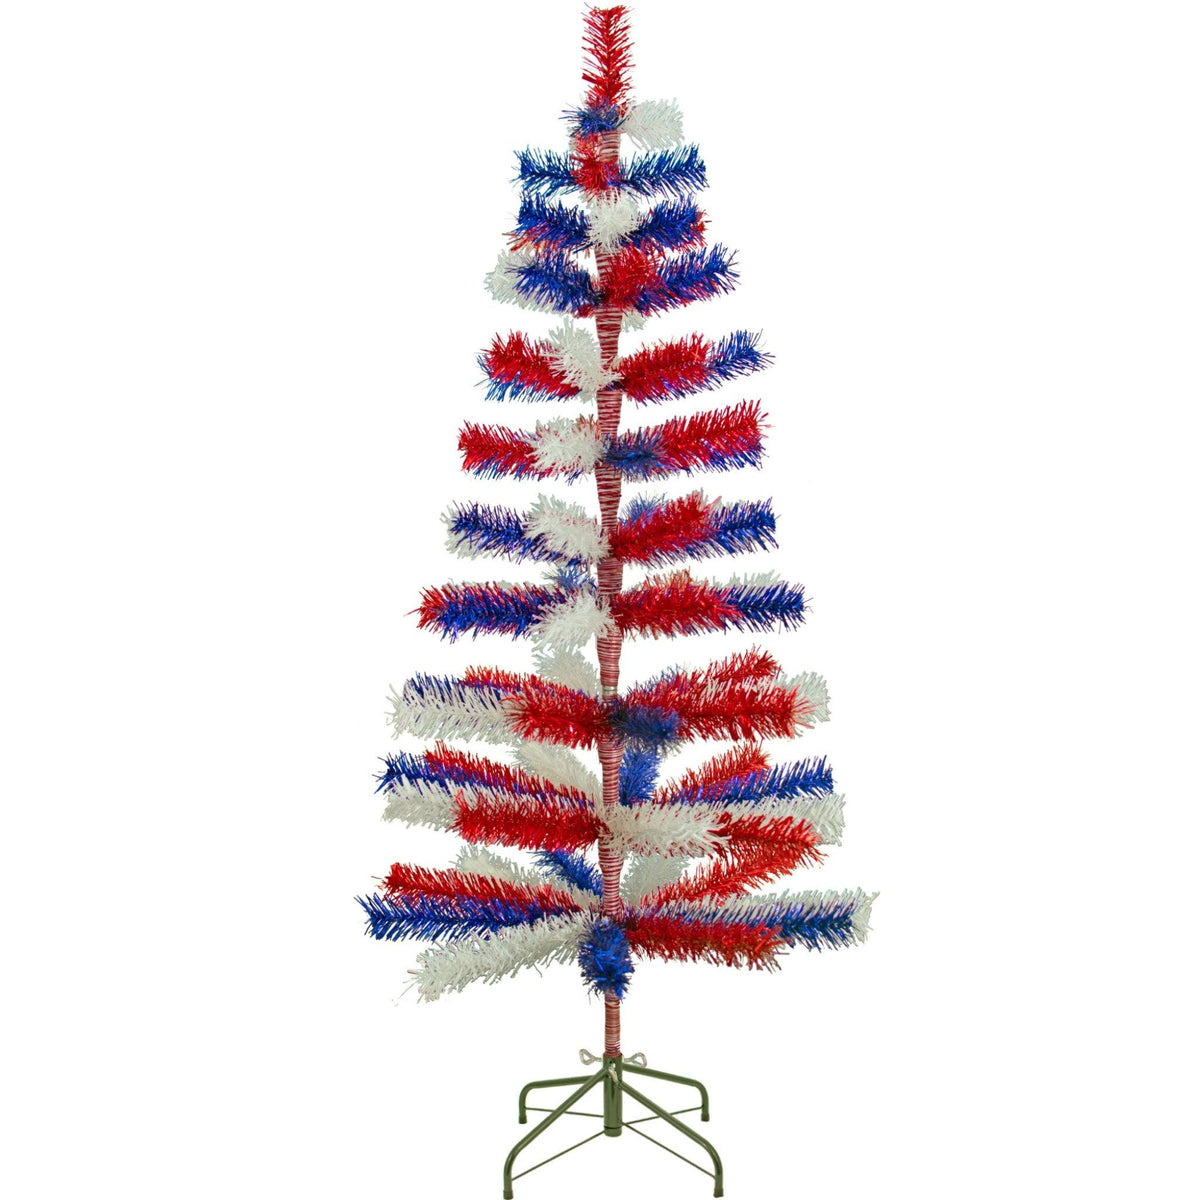 60in Tall Red White and Blue Mixed Tinsel Christmas Tree on sale at leedisplay.com.